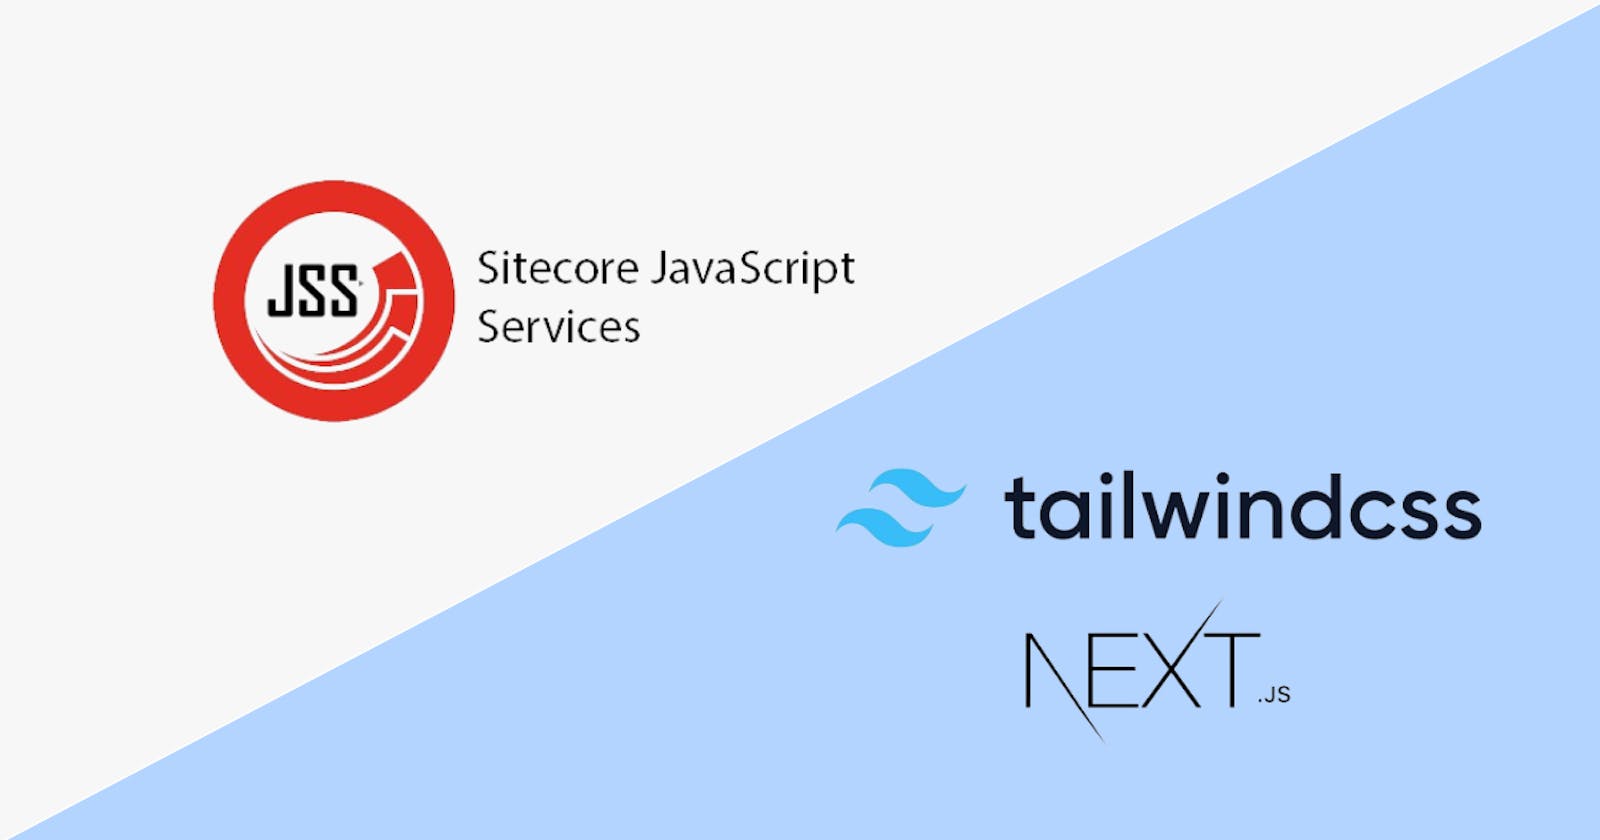 Easily set up multi-theming in Sitecore JSS using Next.js and Tailwind CSS (Part 2)